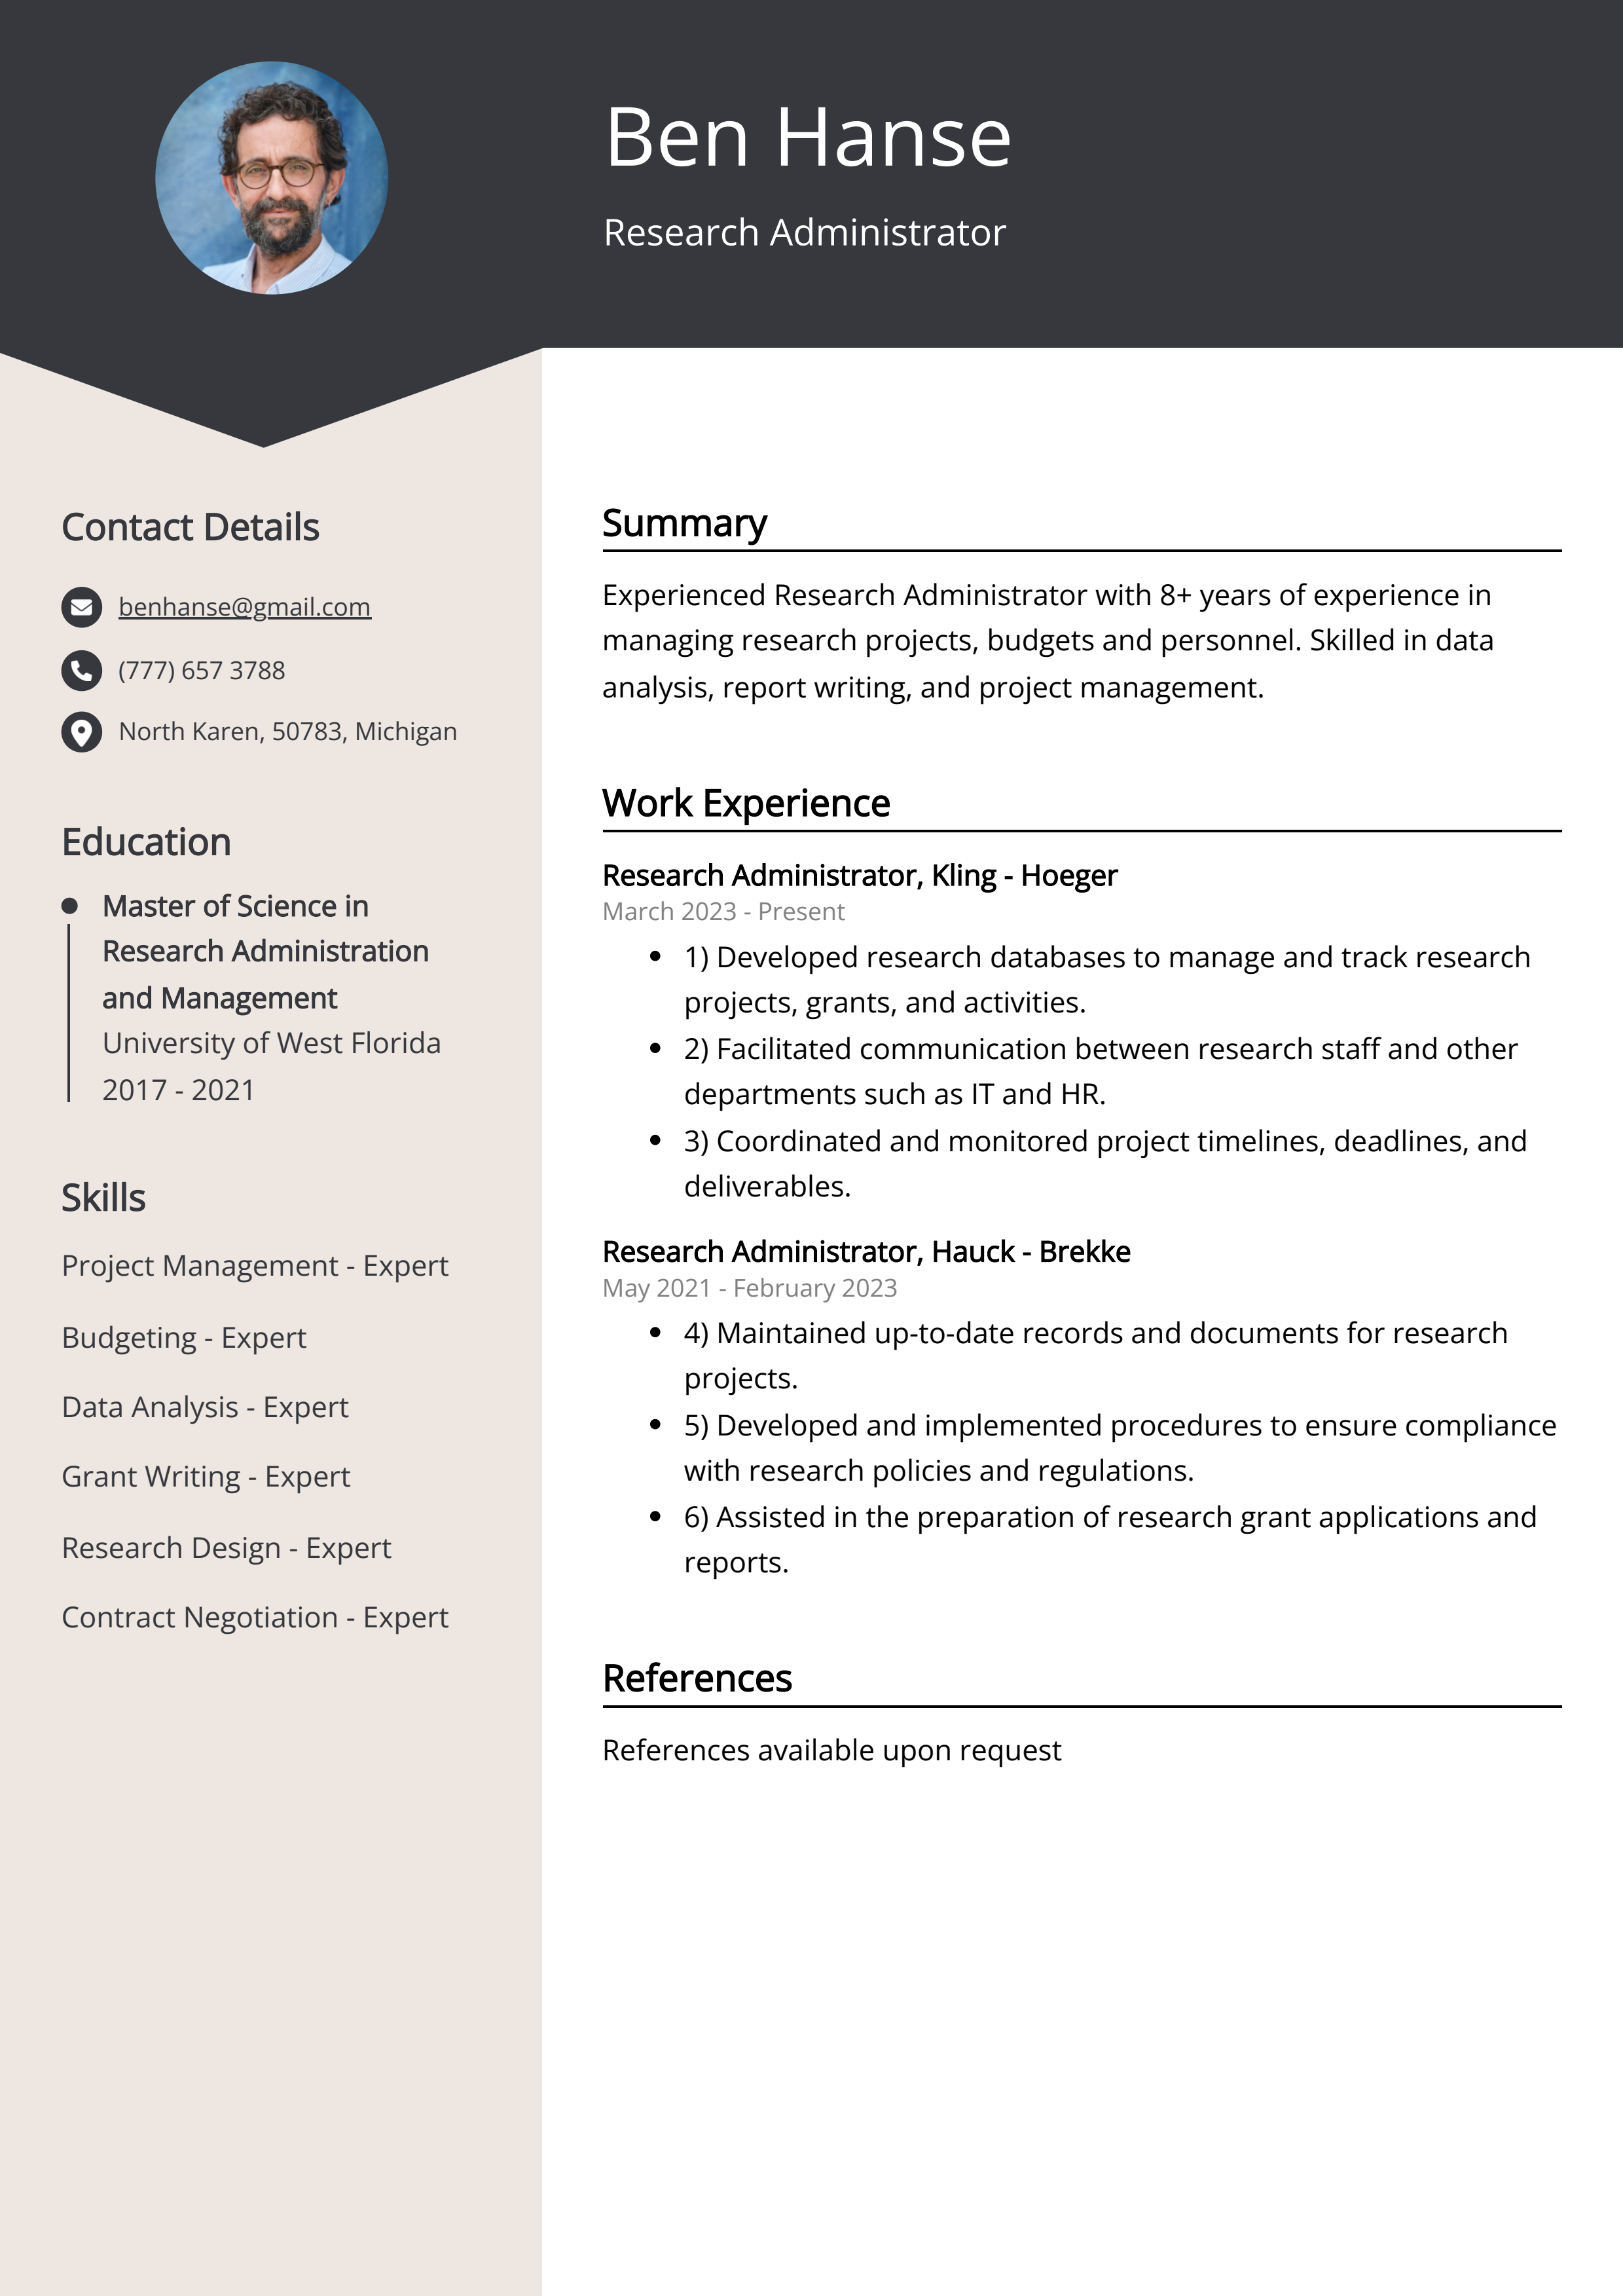 Research Administrator CV Example